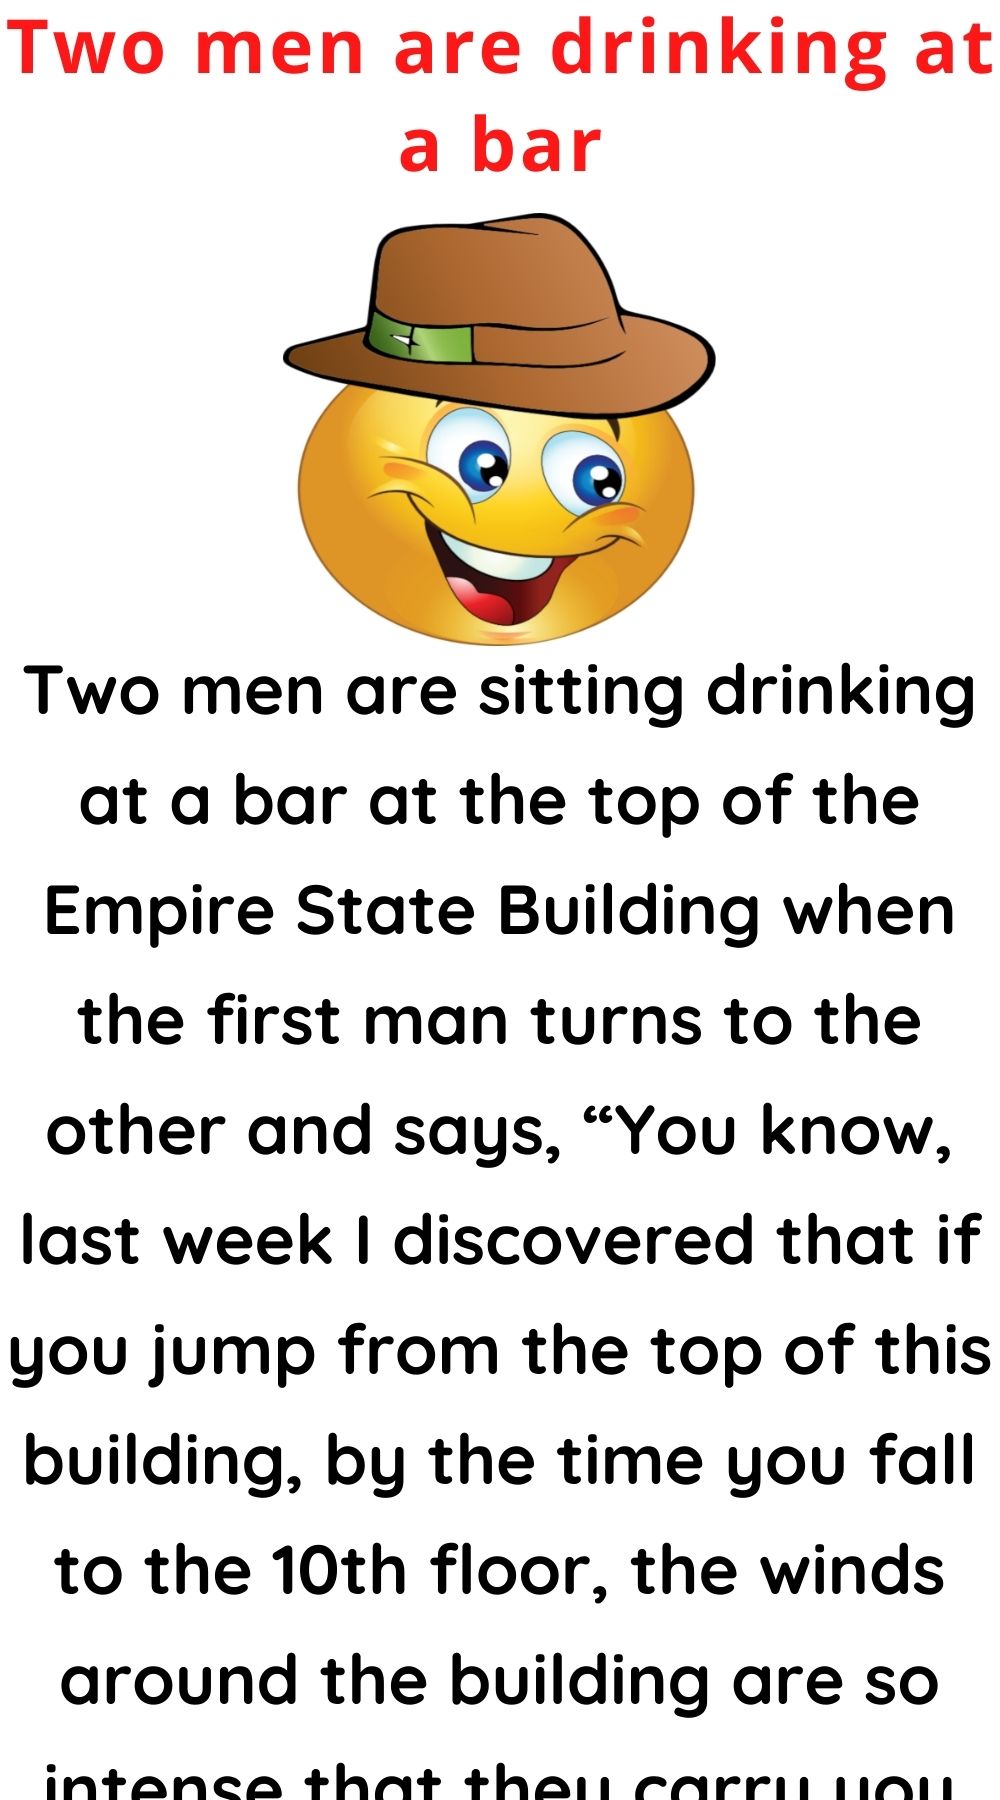 Two men are drinking at a bar